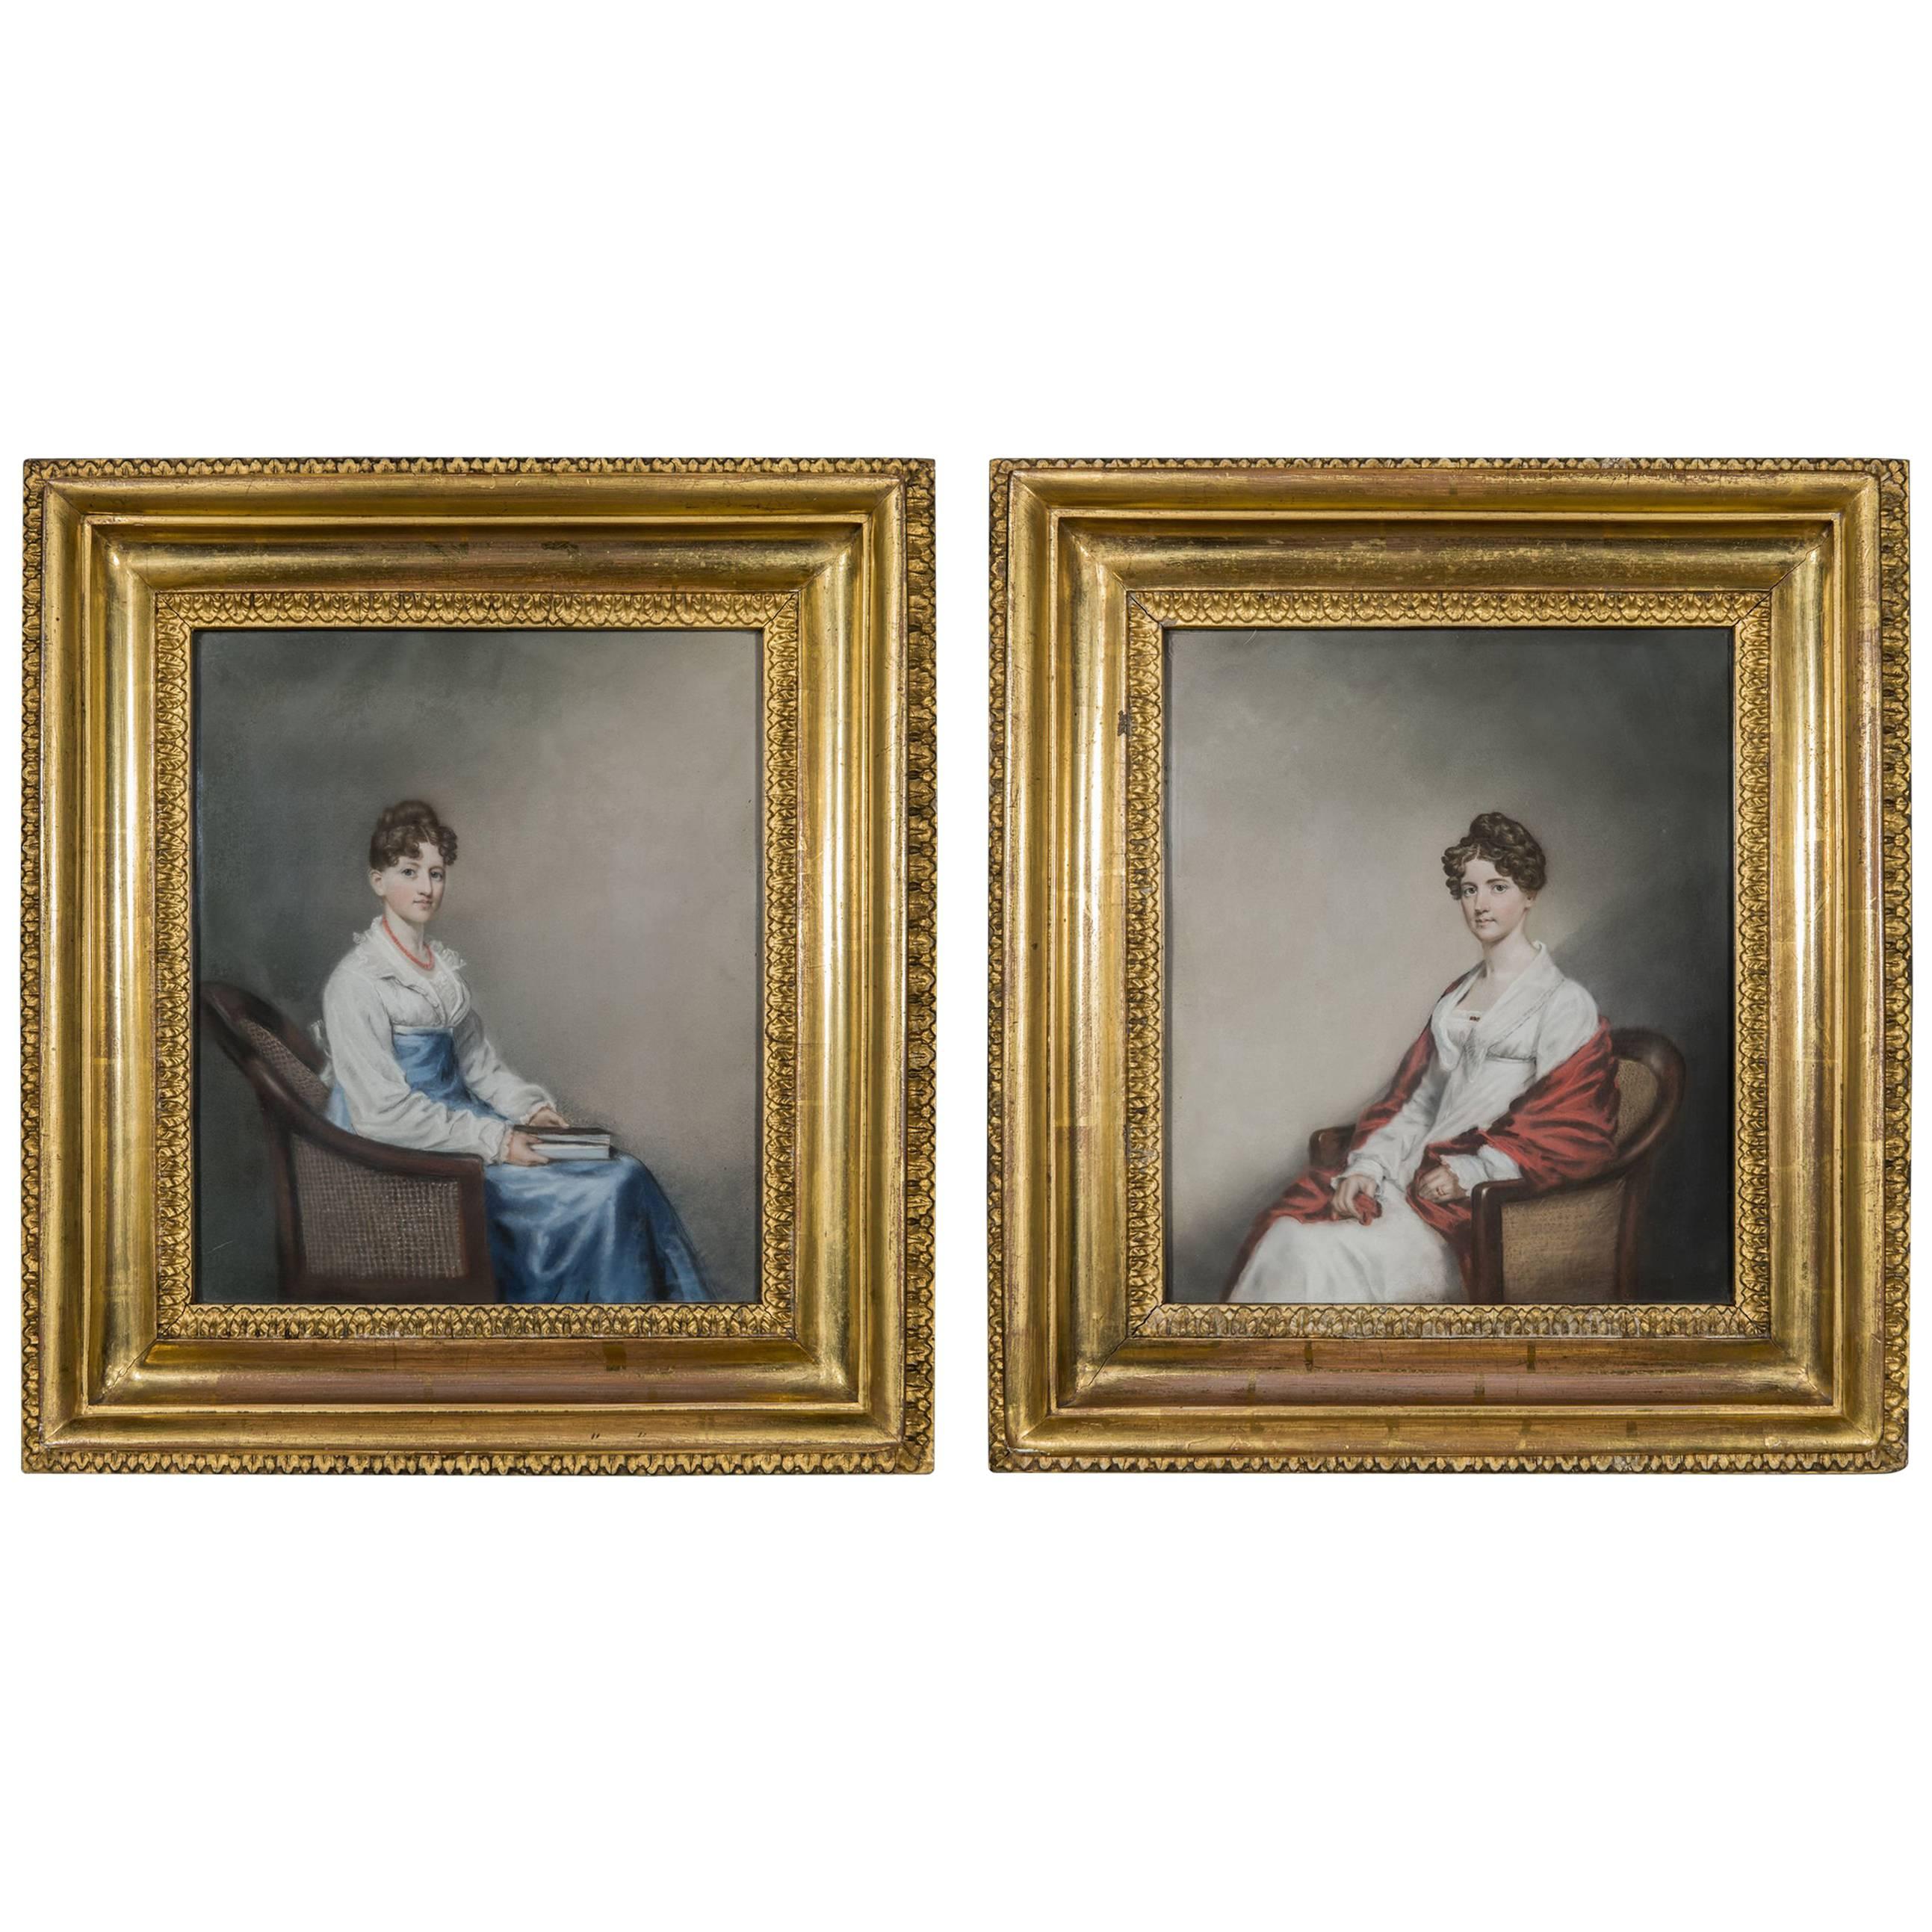 Rare Pair of Early 19th Century Regency Period Pastel and Watercolor Portraits